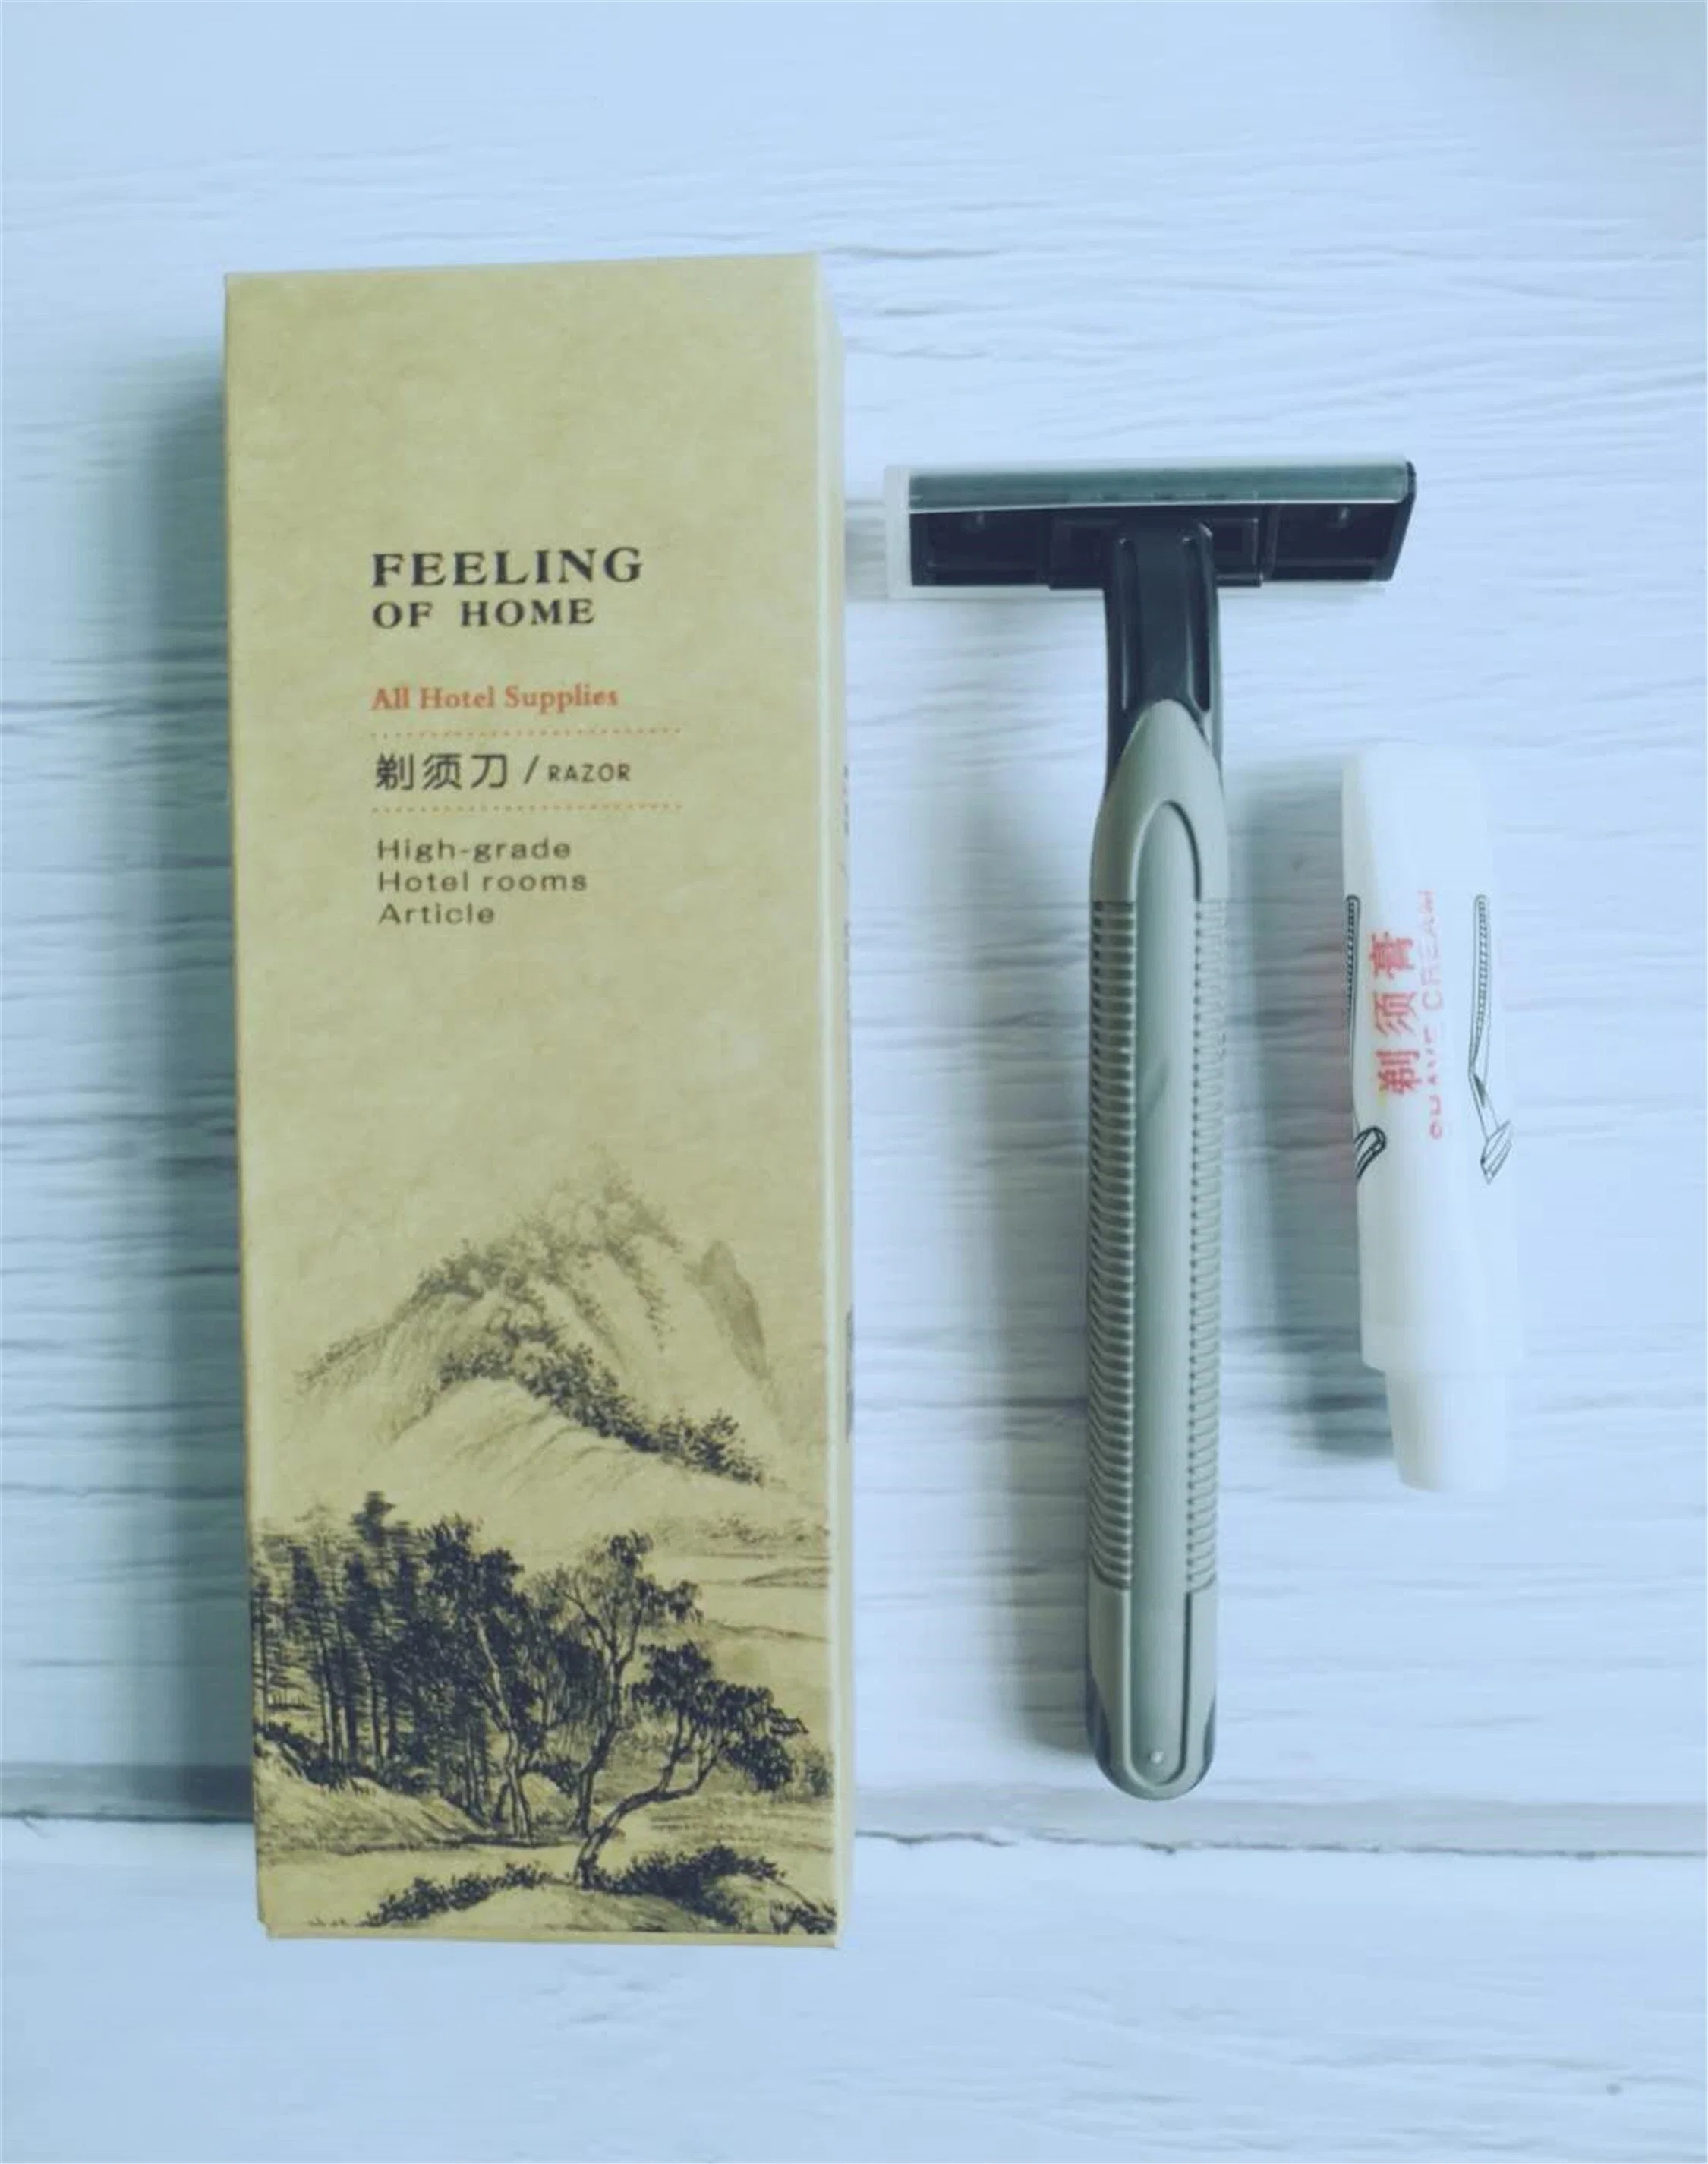 Shaving Razor in Box with Hotel Amenities for Hotel Room